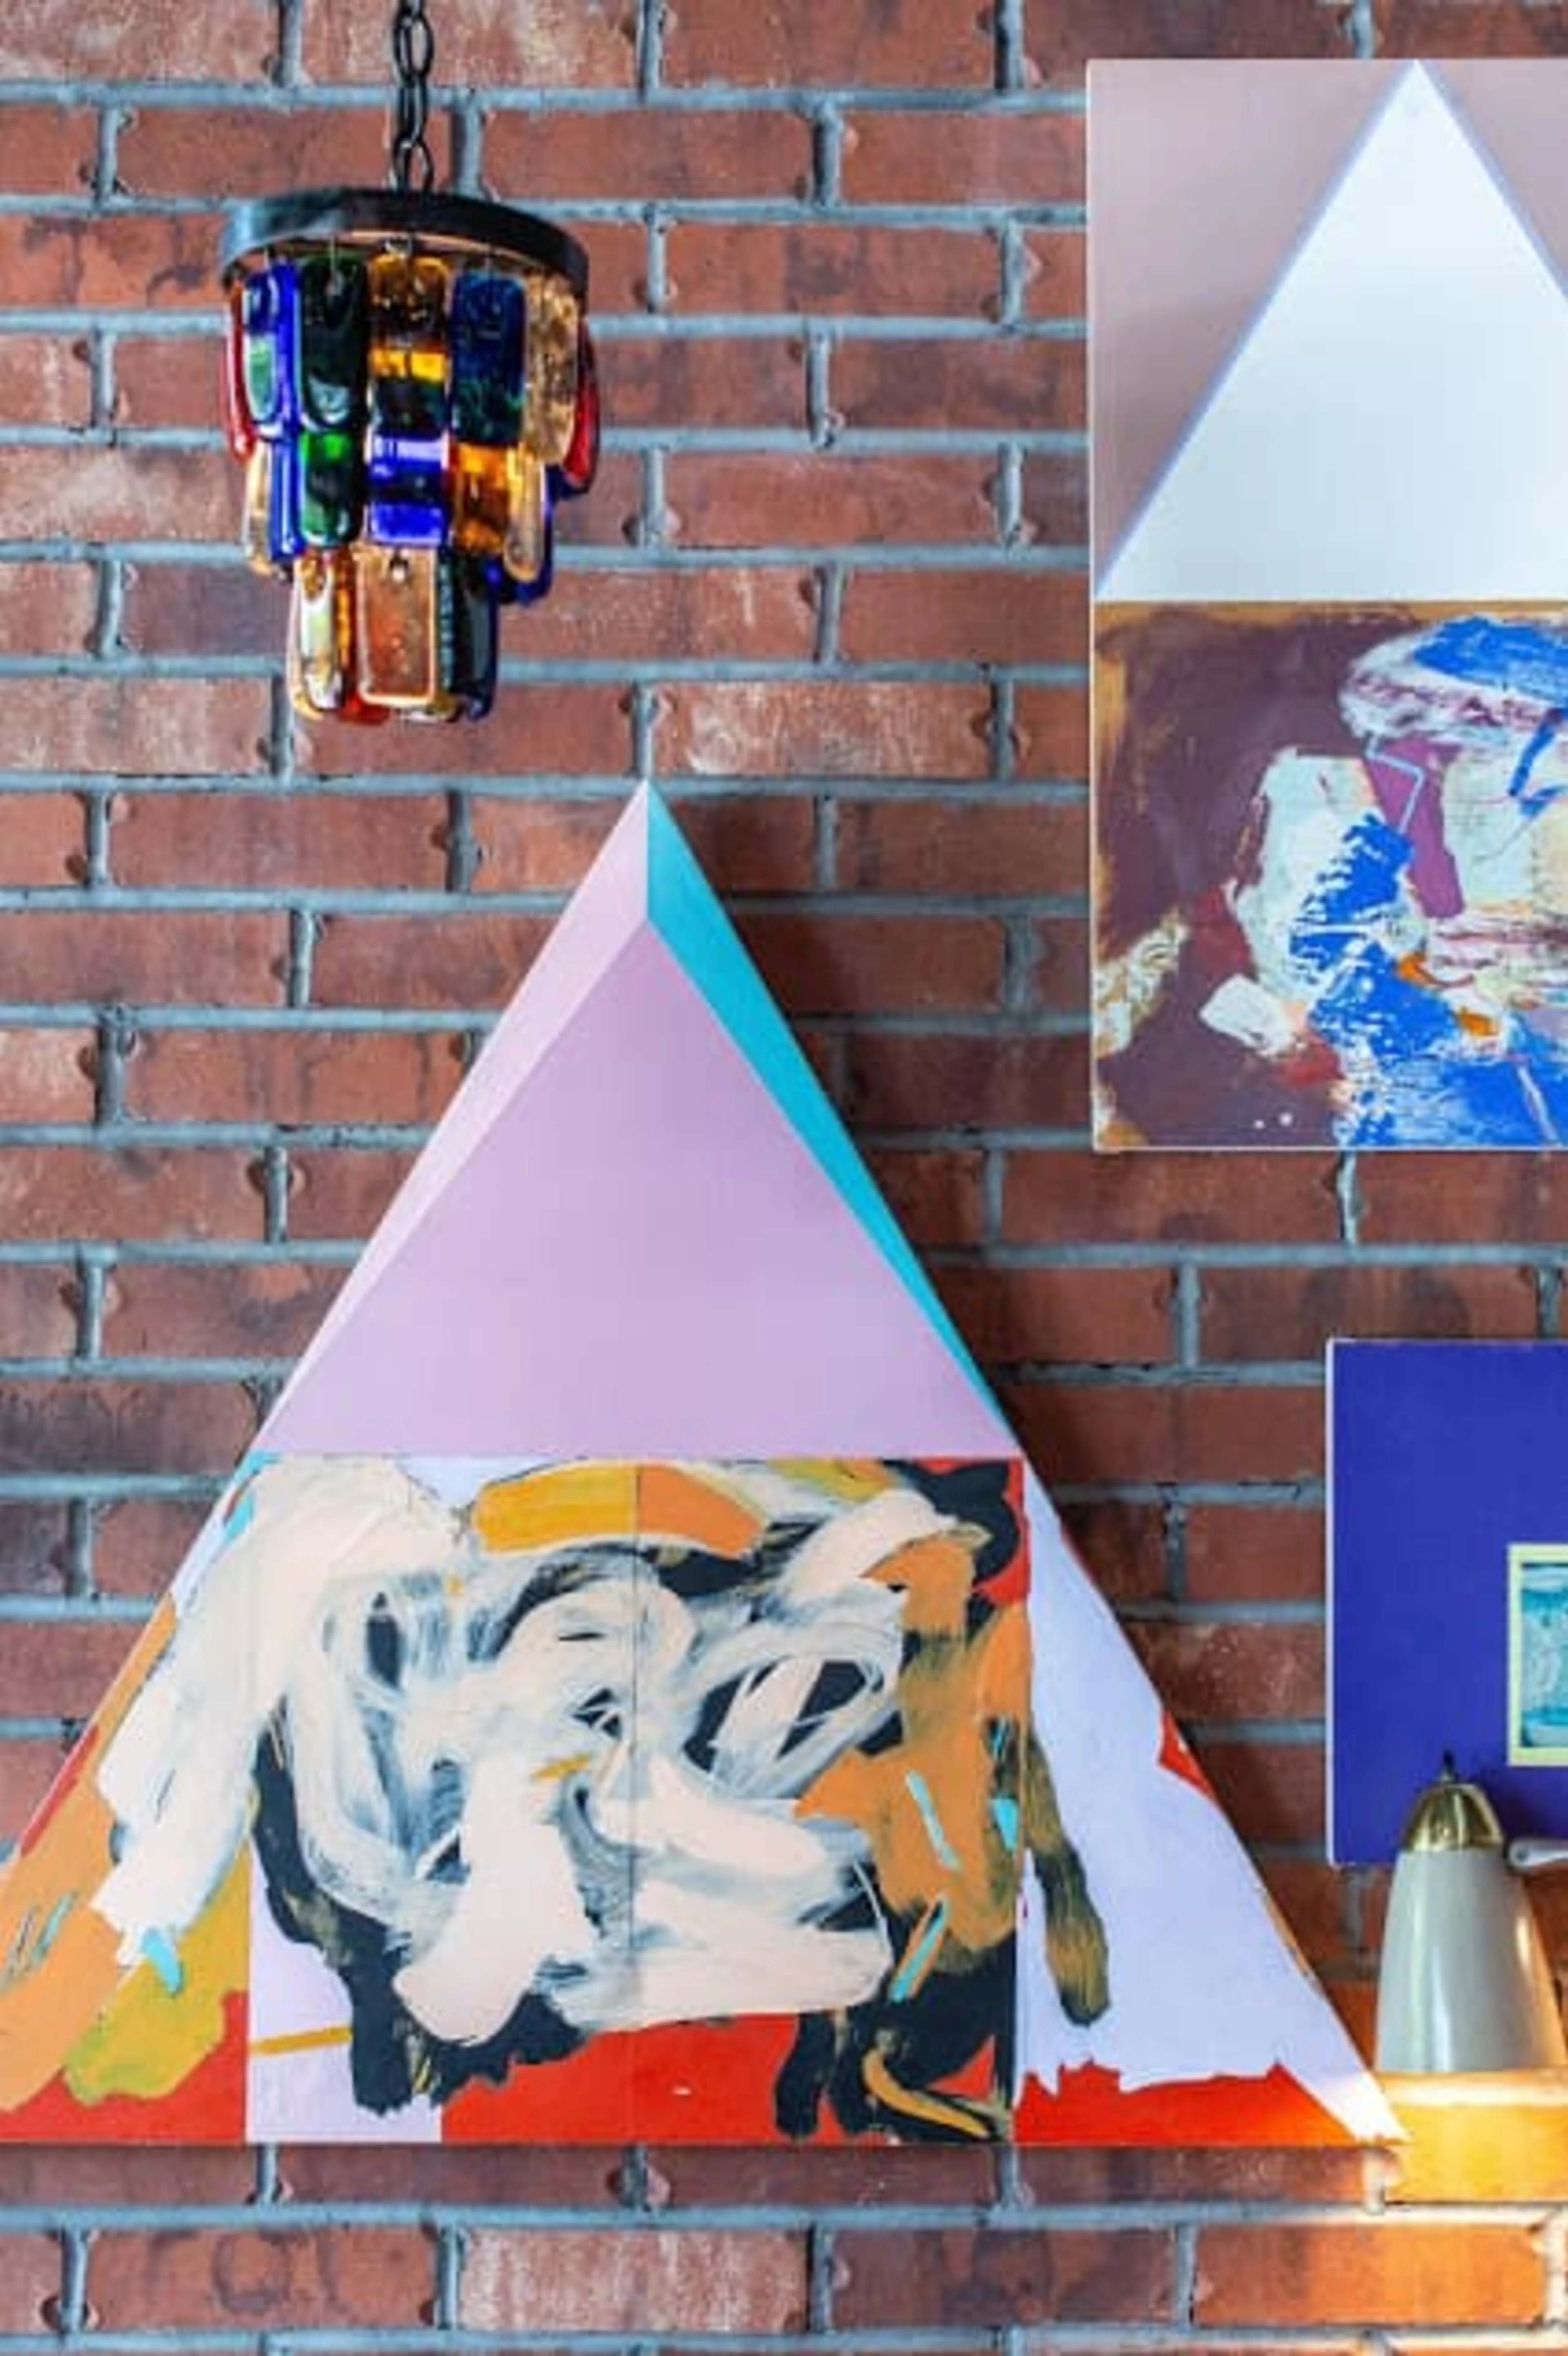 A brick wall with colorful pieces of art